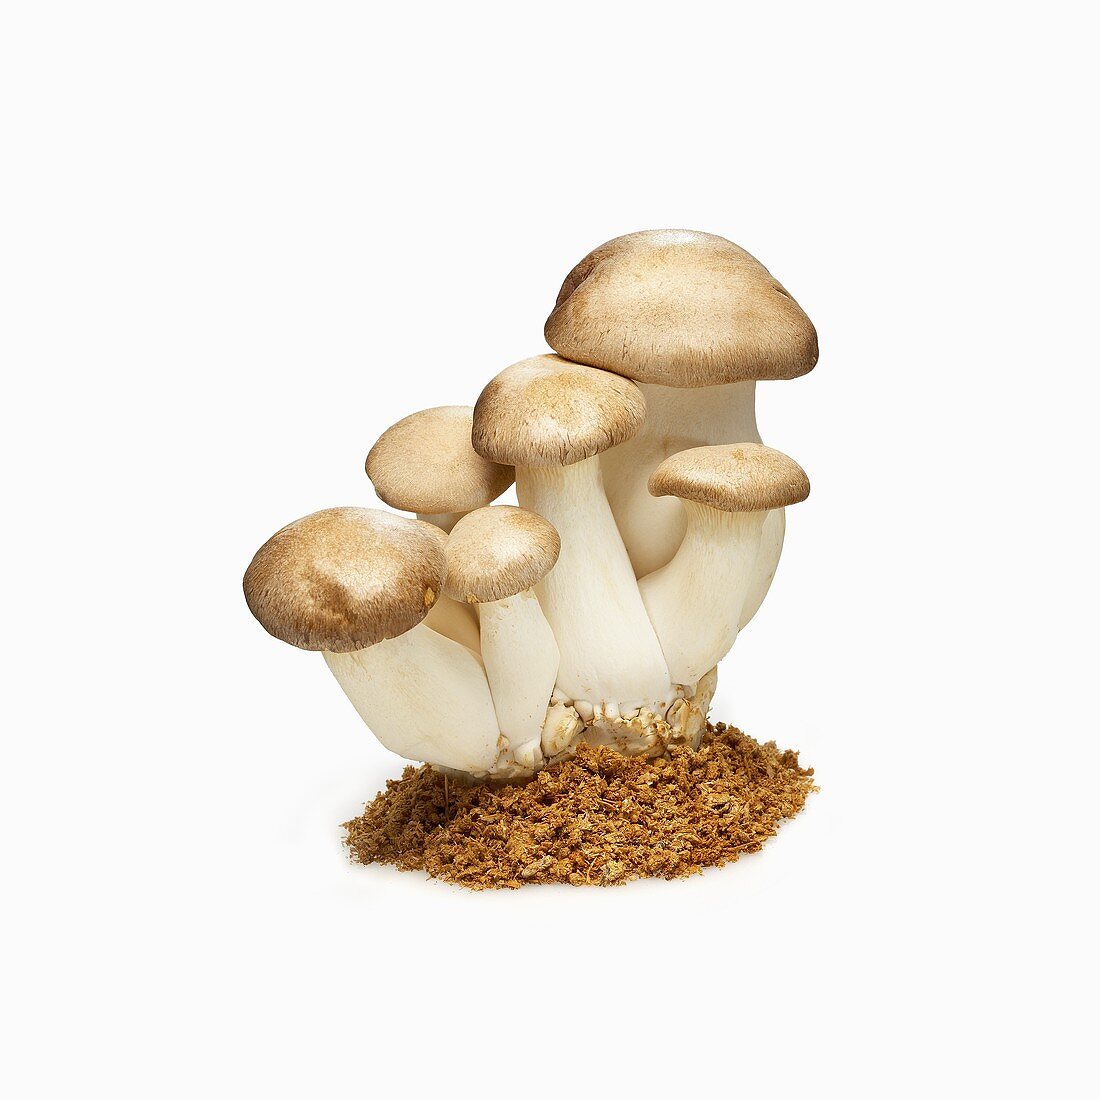 King Trumpet Mushrooms on a White Background